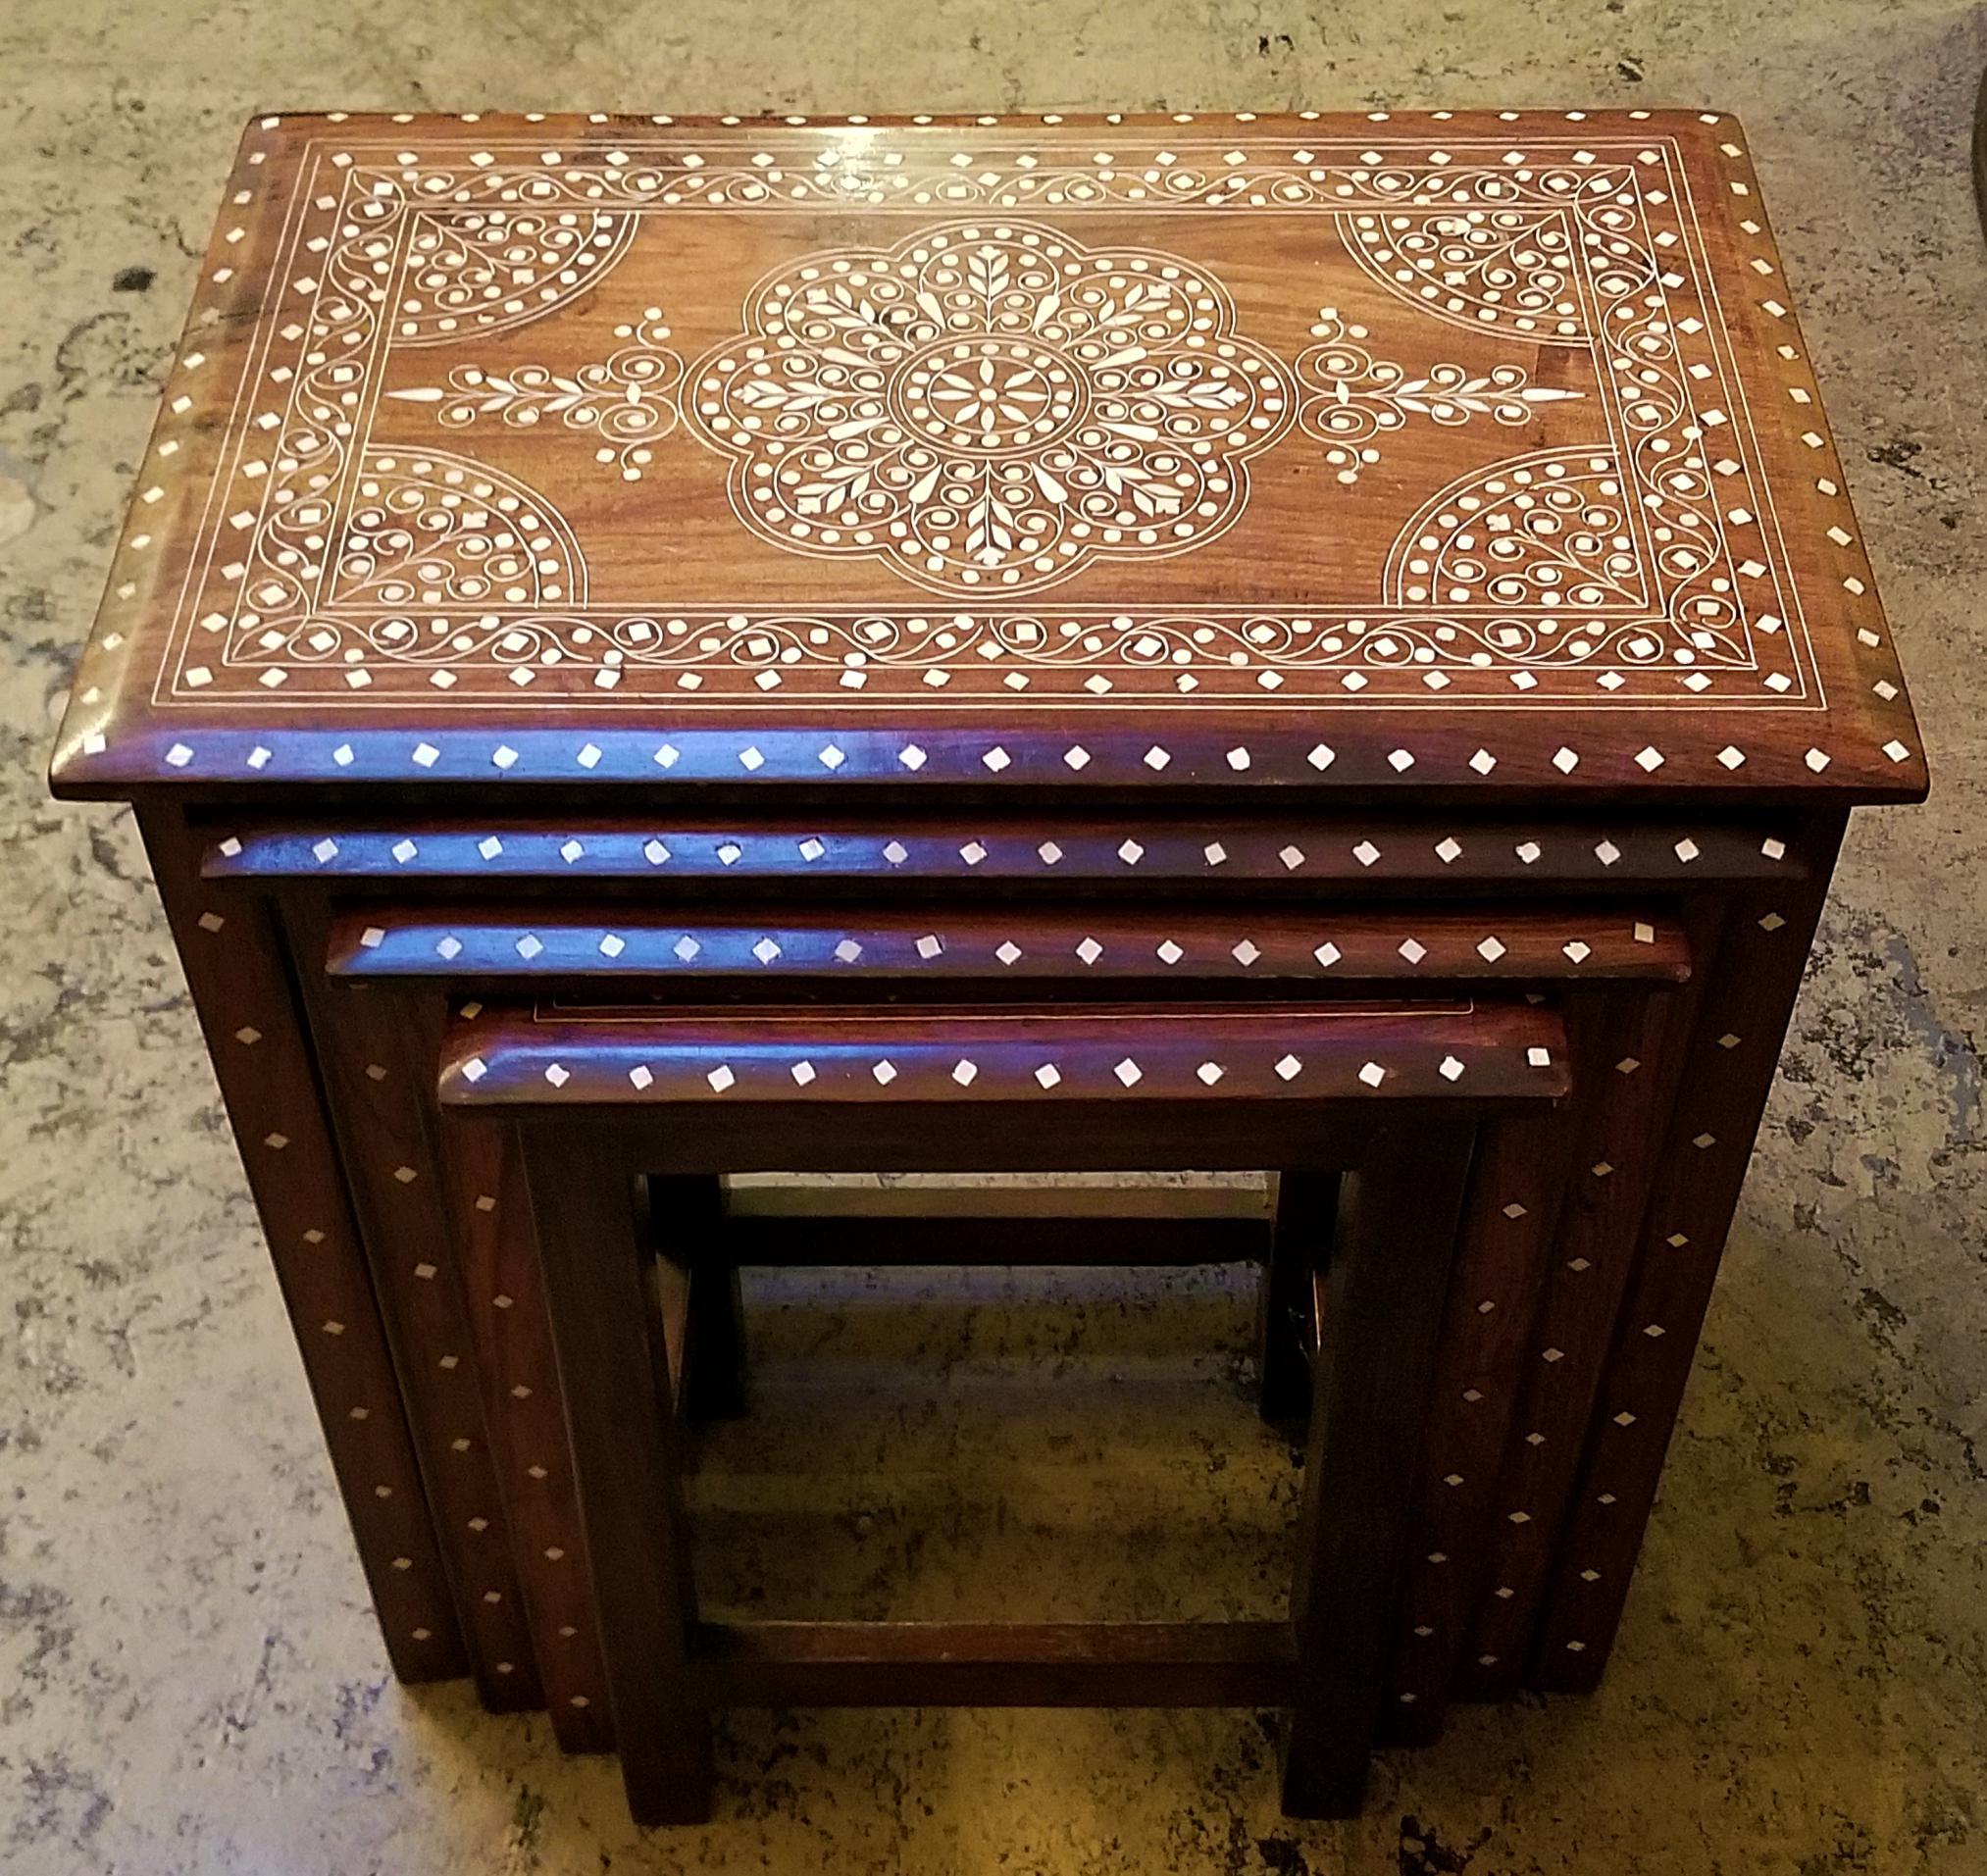 Presenting a gorgeous set of late 19th or early 20th century Anglo-Indian bone inlaid nest of tables.

From circa 1890-1900.

Made of teak and profusely inlaid with bone in floral and geometric patterns.

Four tables in all, each smaller than